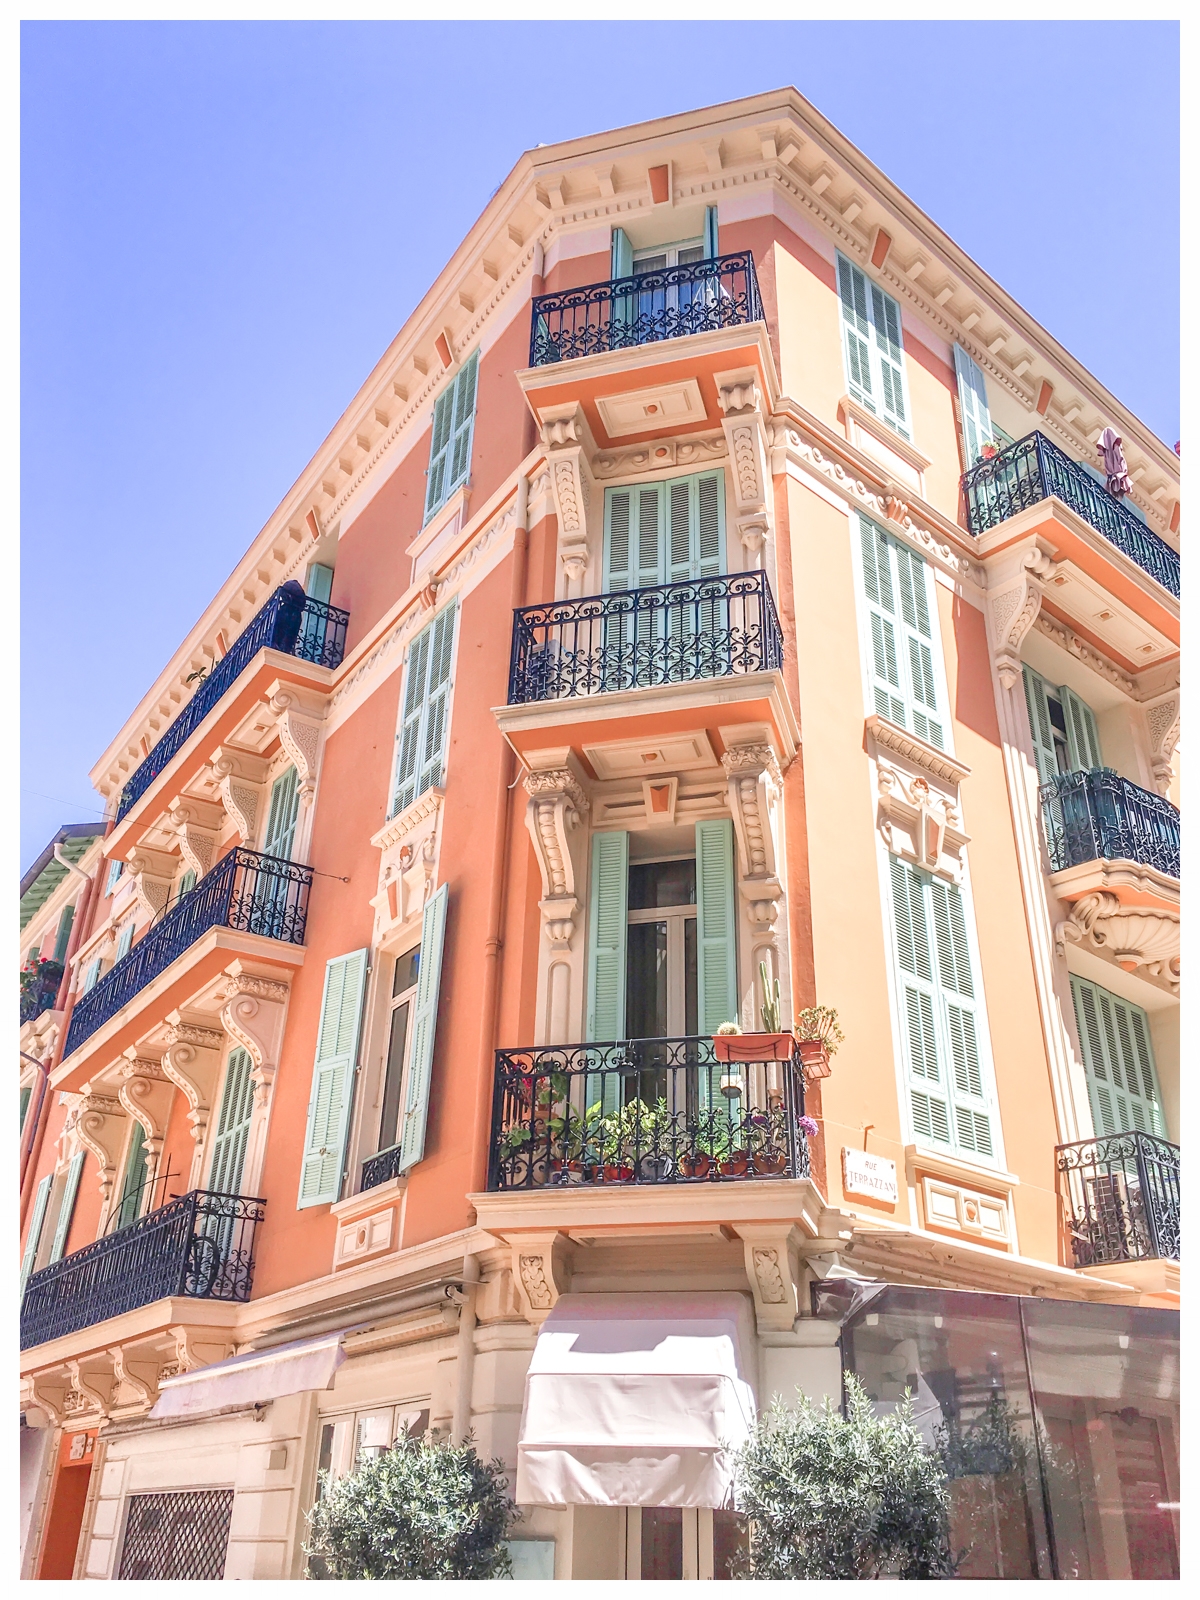 How to See Monaco in One Day | A Travel Guide | Things to do in Monte Carlo and Monaco-Ville | If you only have one day to spend in this glamorous city-state, this is your guide to all the sights, shopping and food in Monaco. | Place du Casino, Gard…